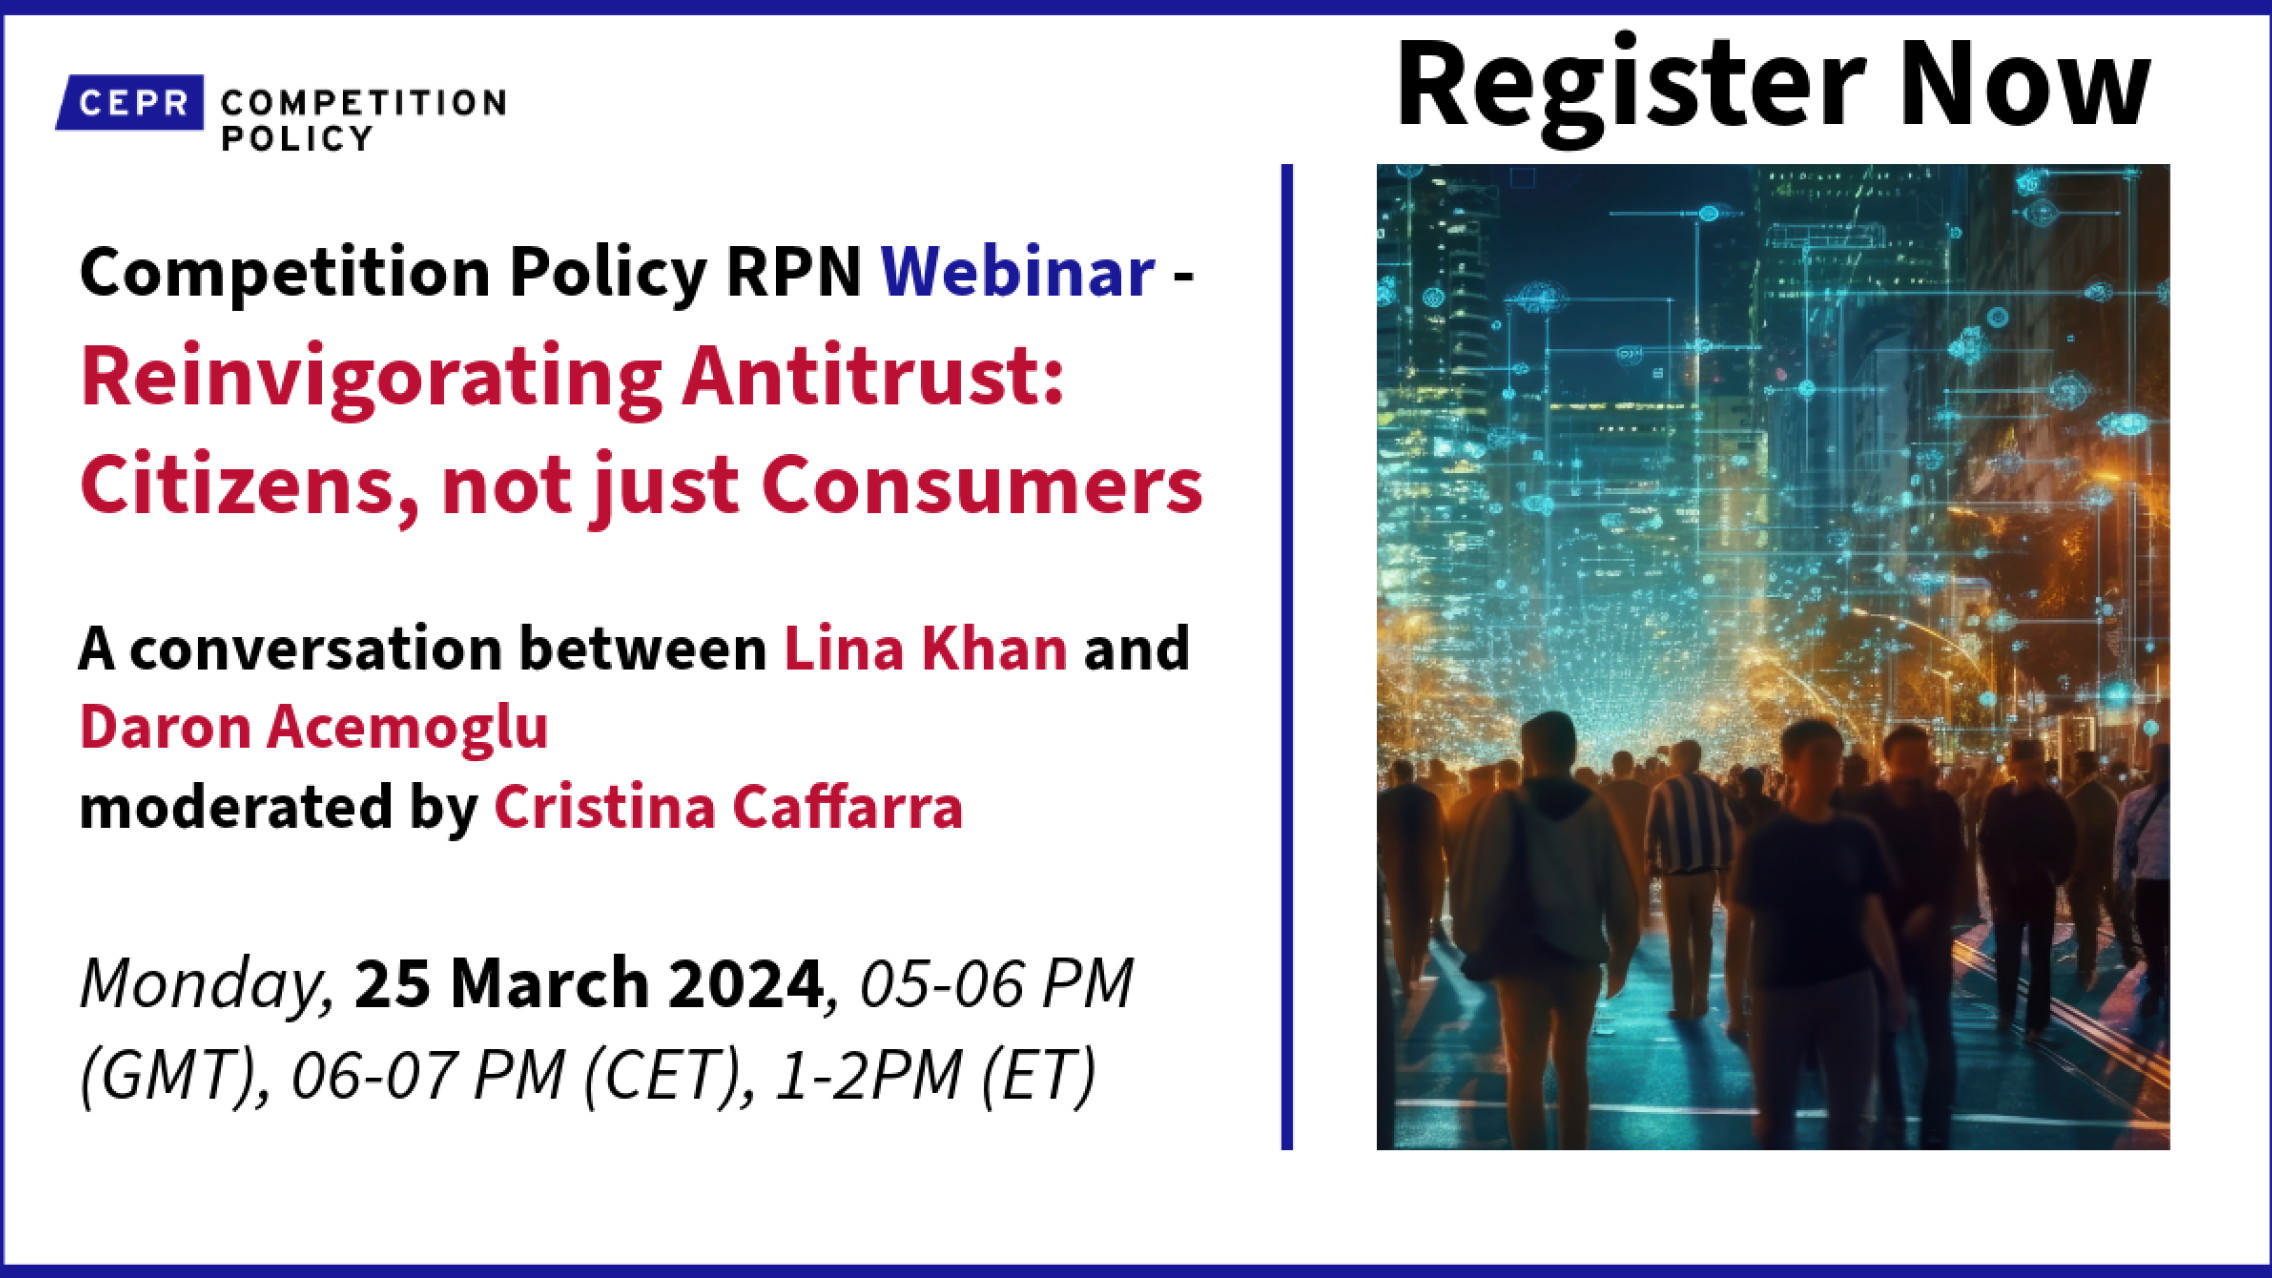 Register for the Competition Policy Webinar